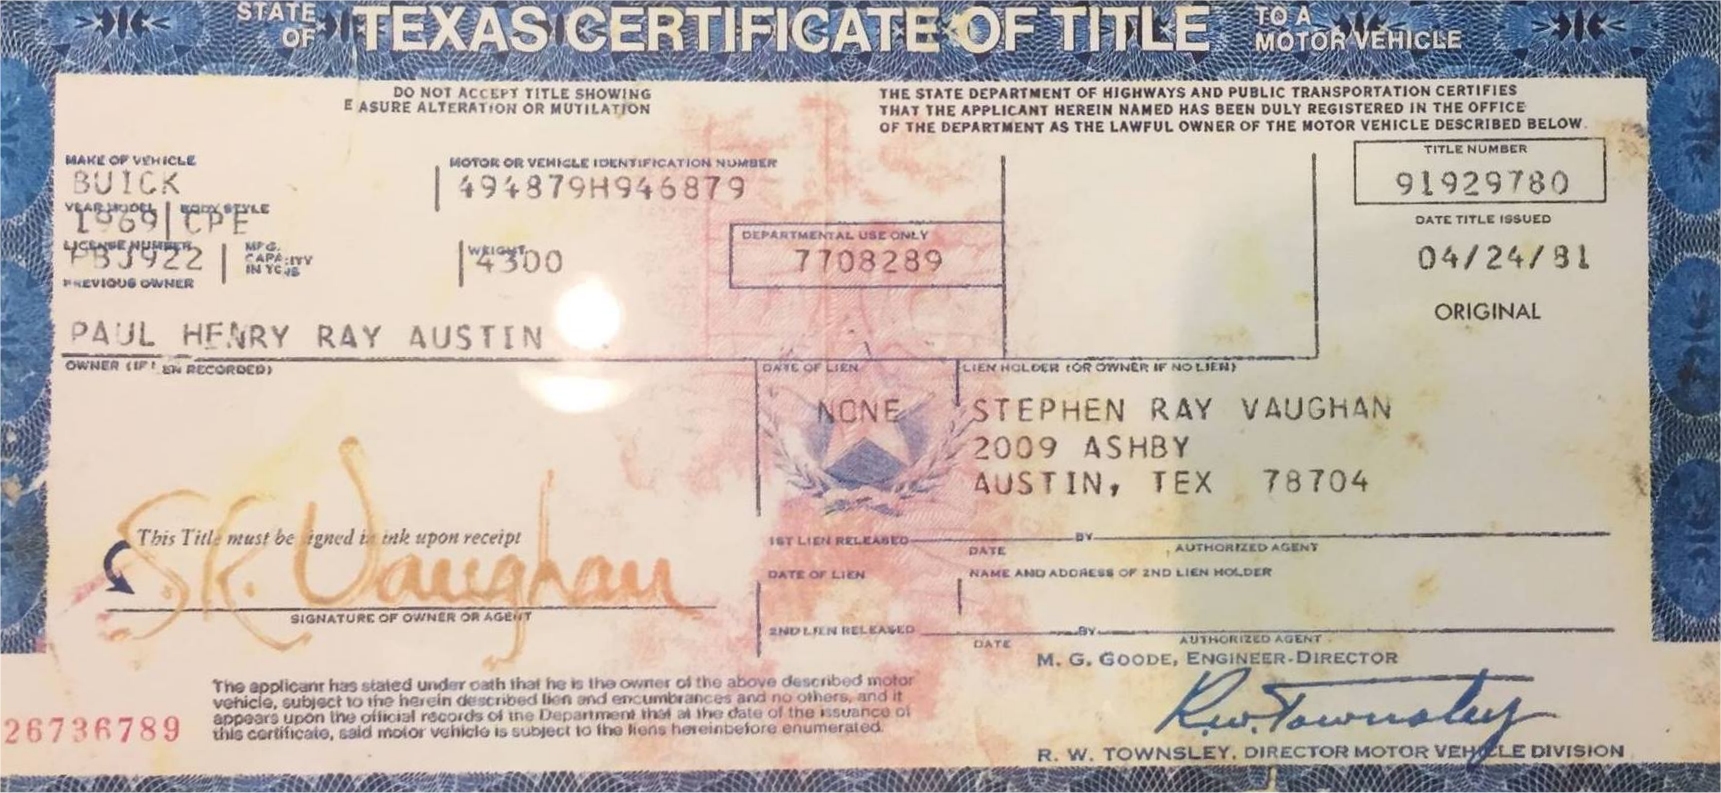 Stevie Ray Vaughan Buick Certificate of Title